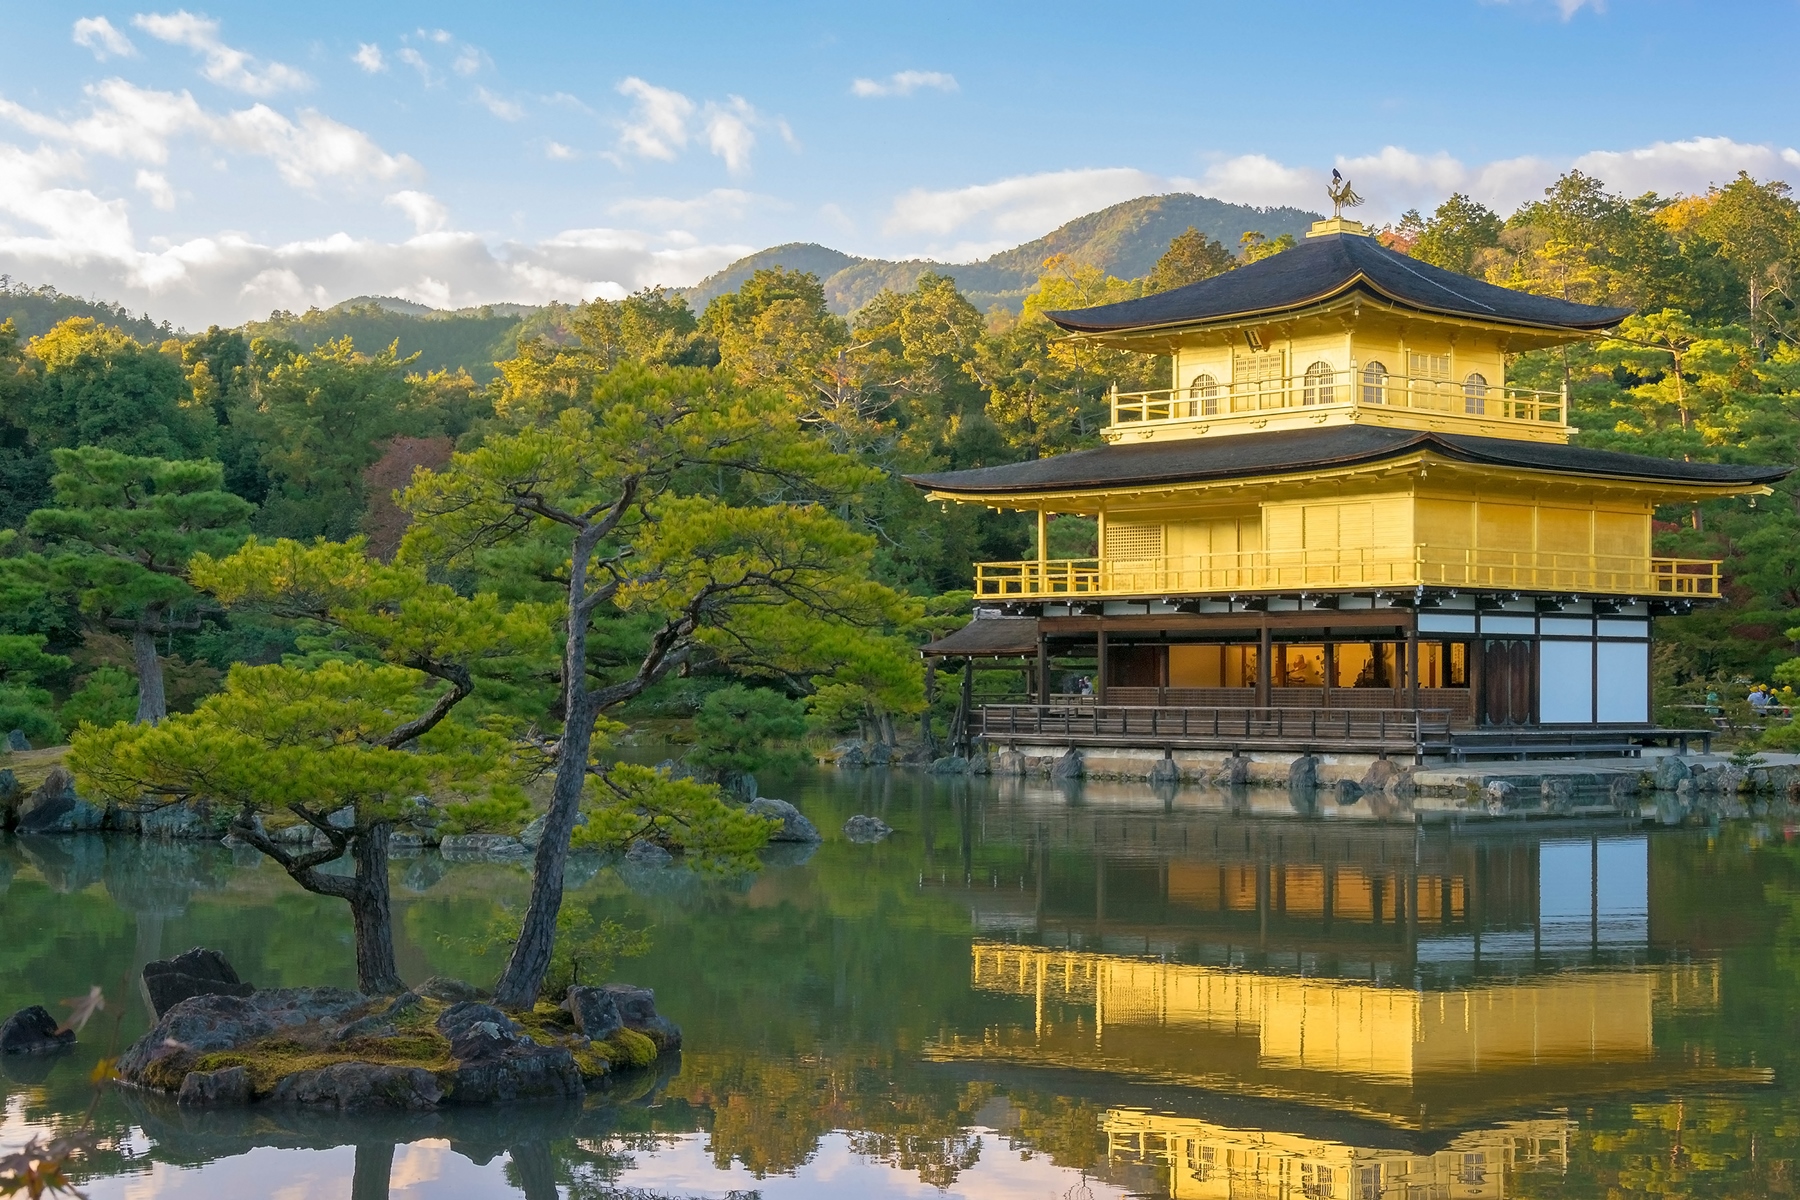 The reflection of Knkakuji Temple, the Golden Pavillion, on the lake in front with woodland all around